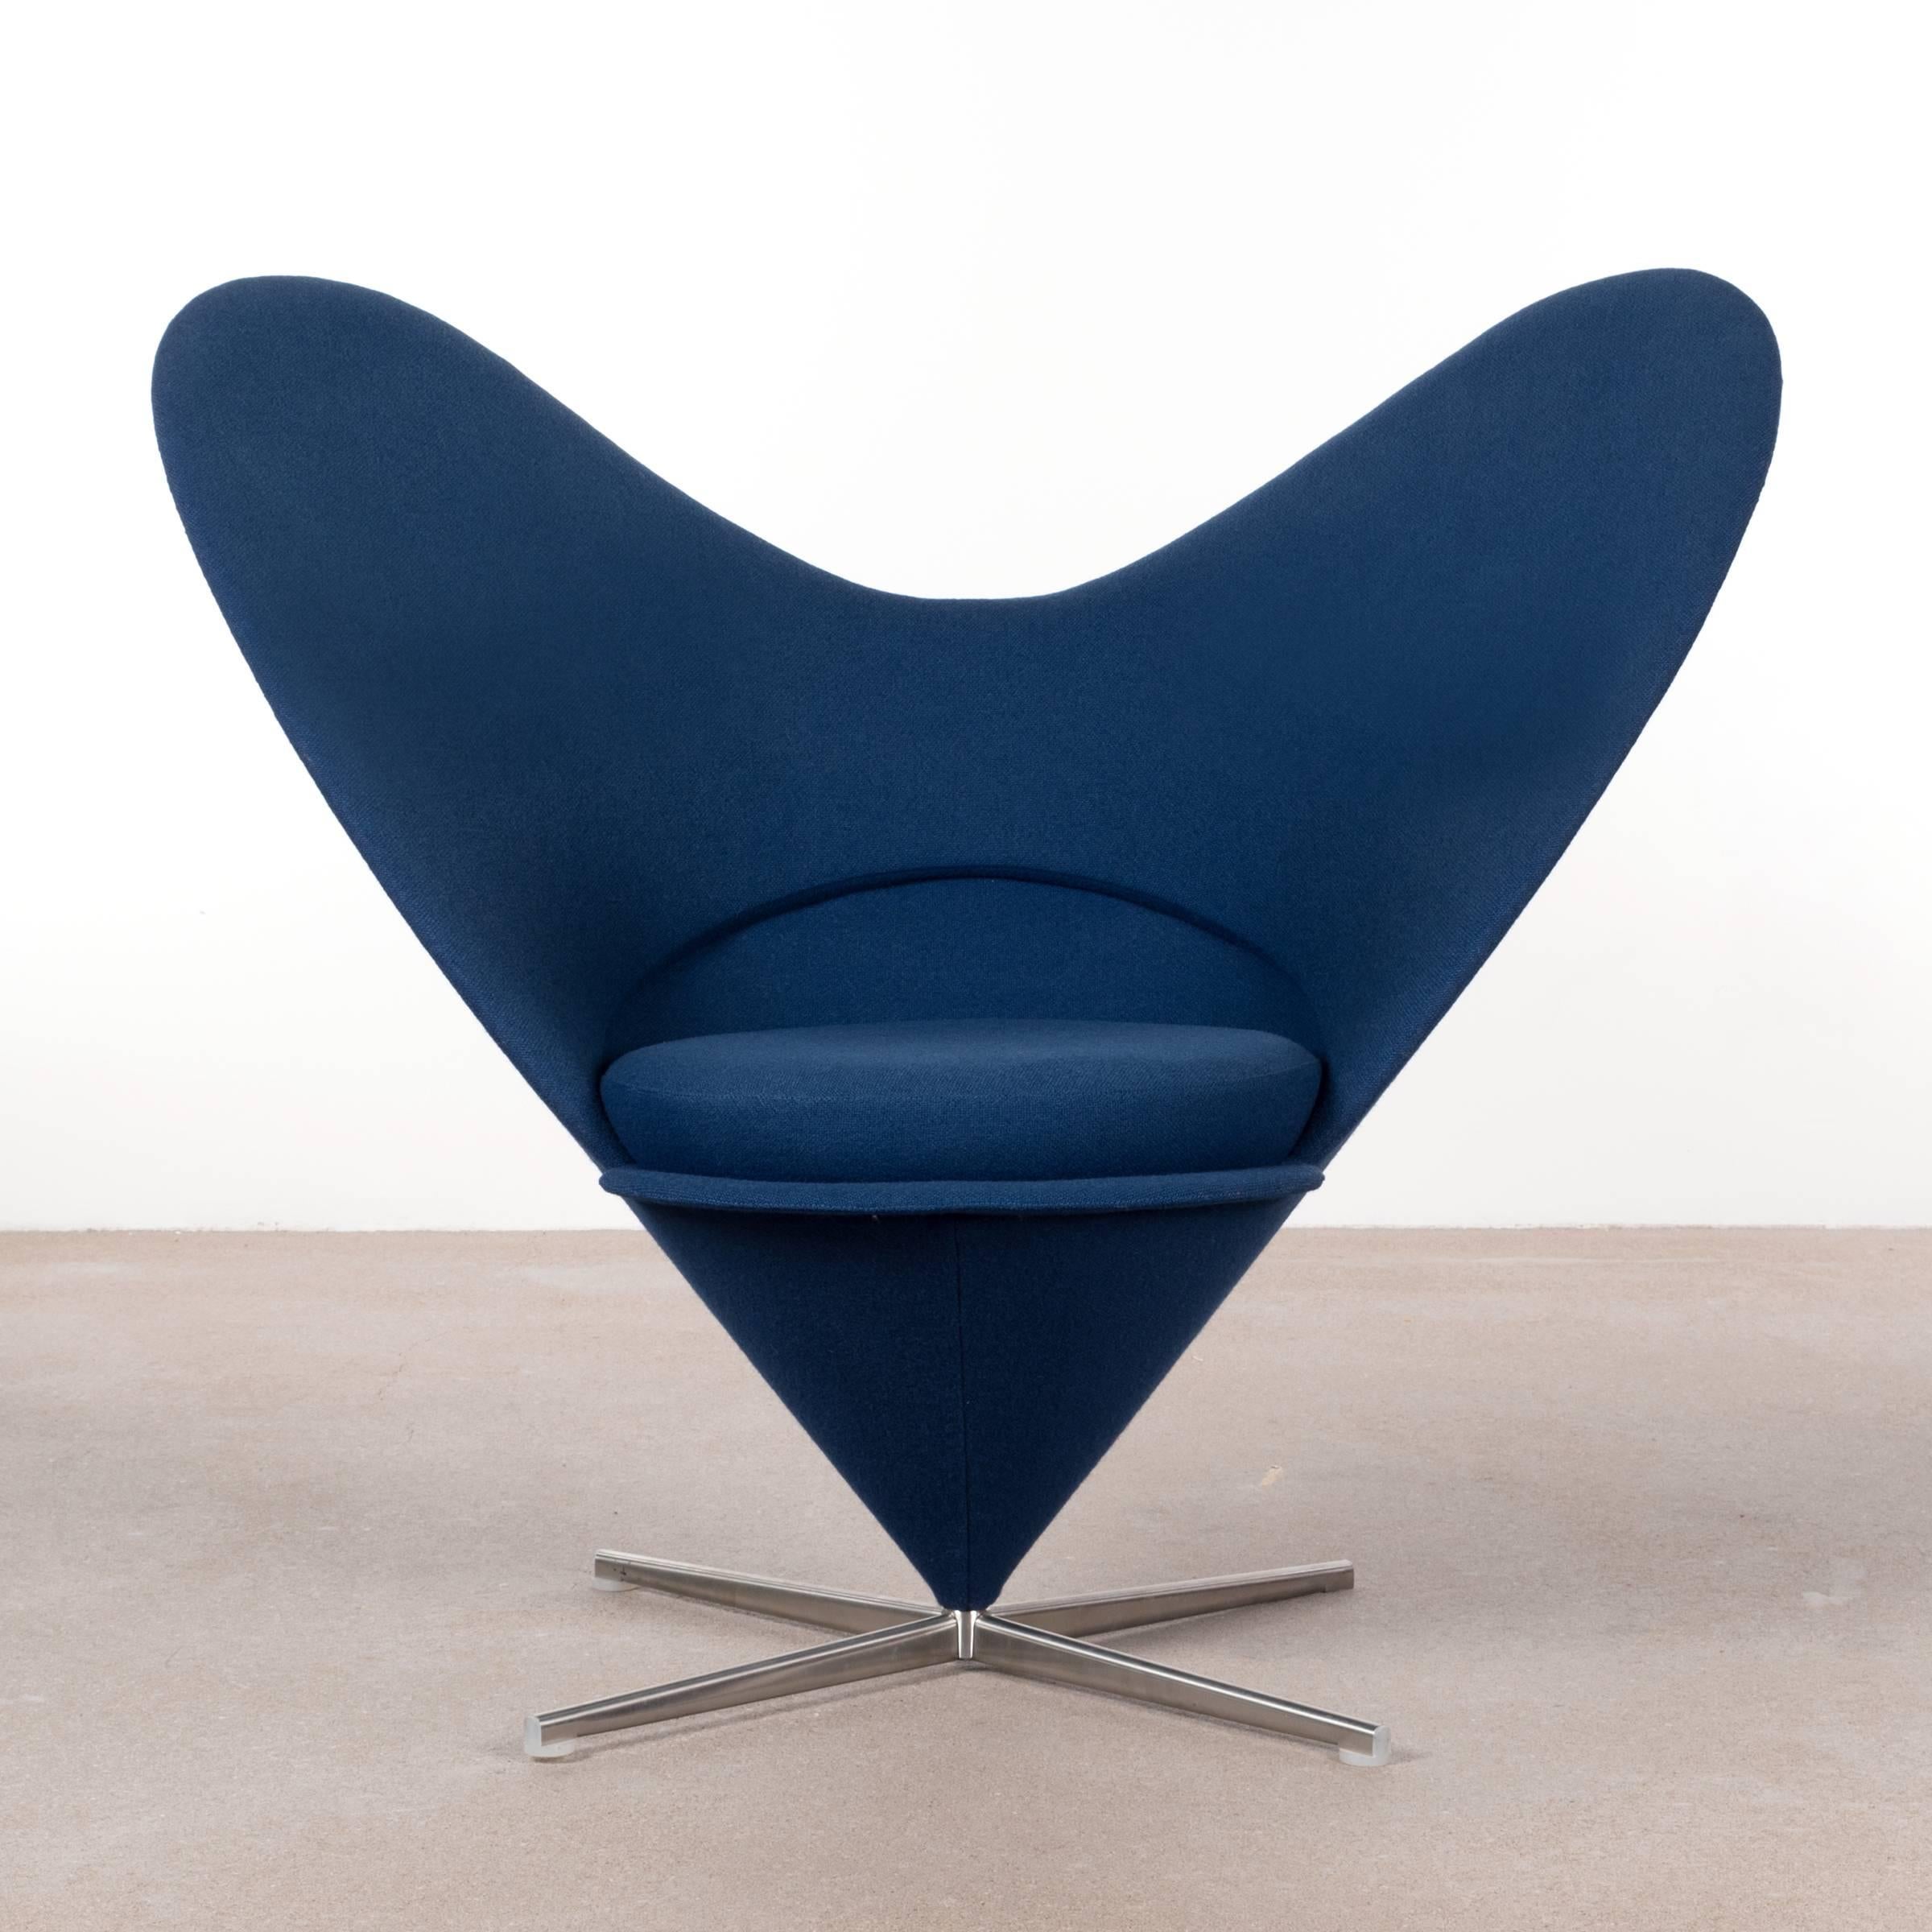 Elegant and beautiful cone heart chair by Verner Panton. Very good original condition with swivel base and Kvadrat dark blue wool upholstery. Signed with manufacture label.